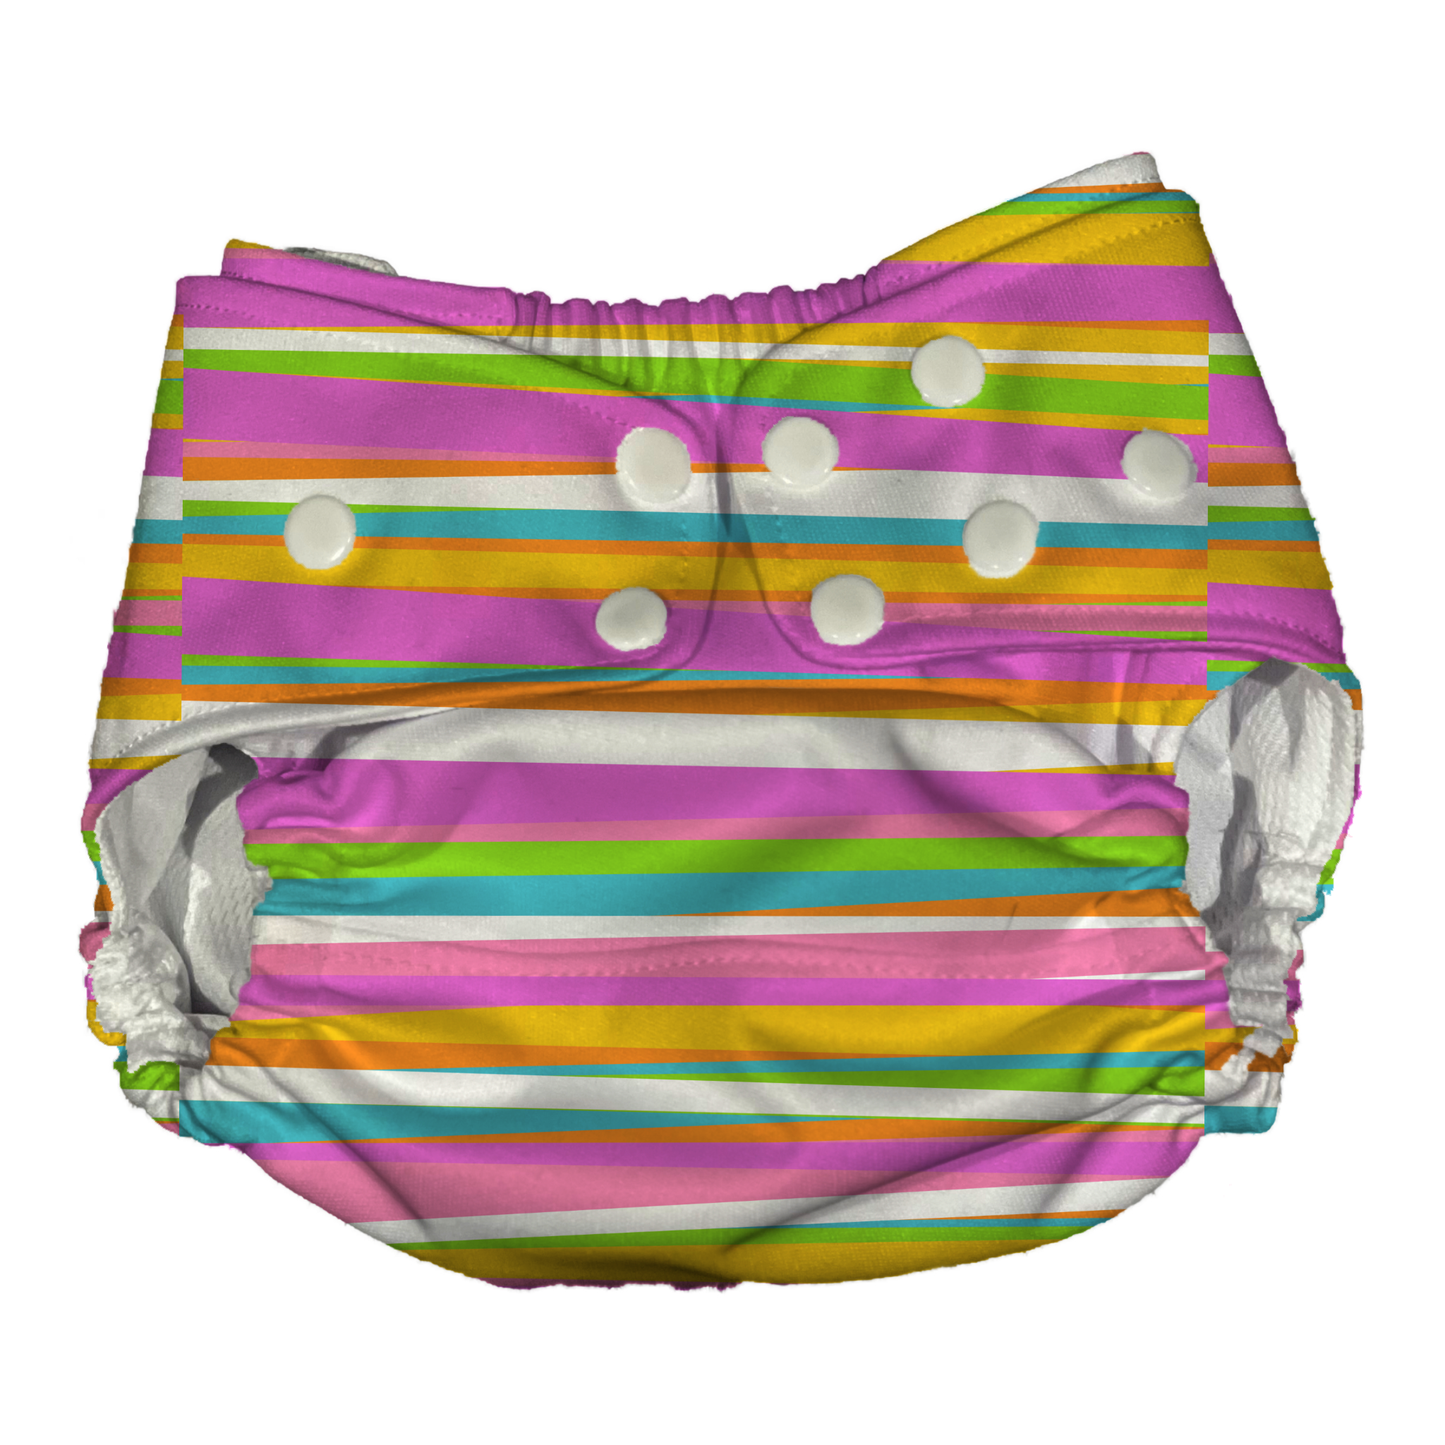 Fun Easter Themed Waterproof Diaper Cover | Reusable Swimmer